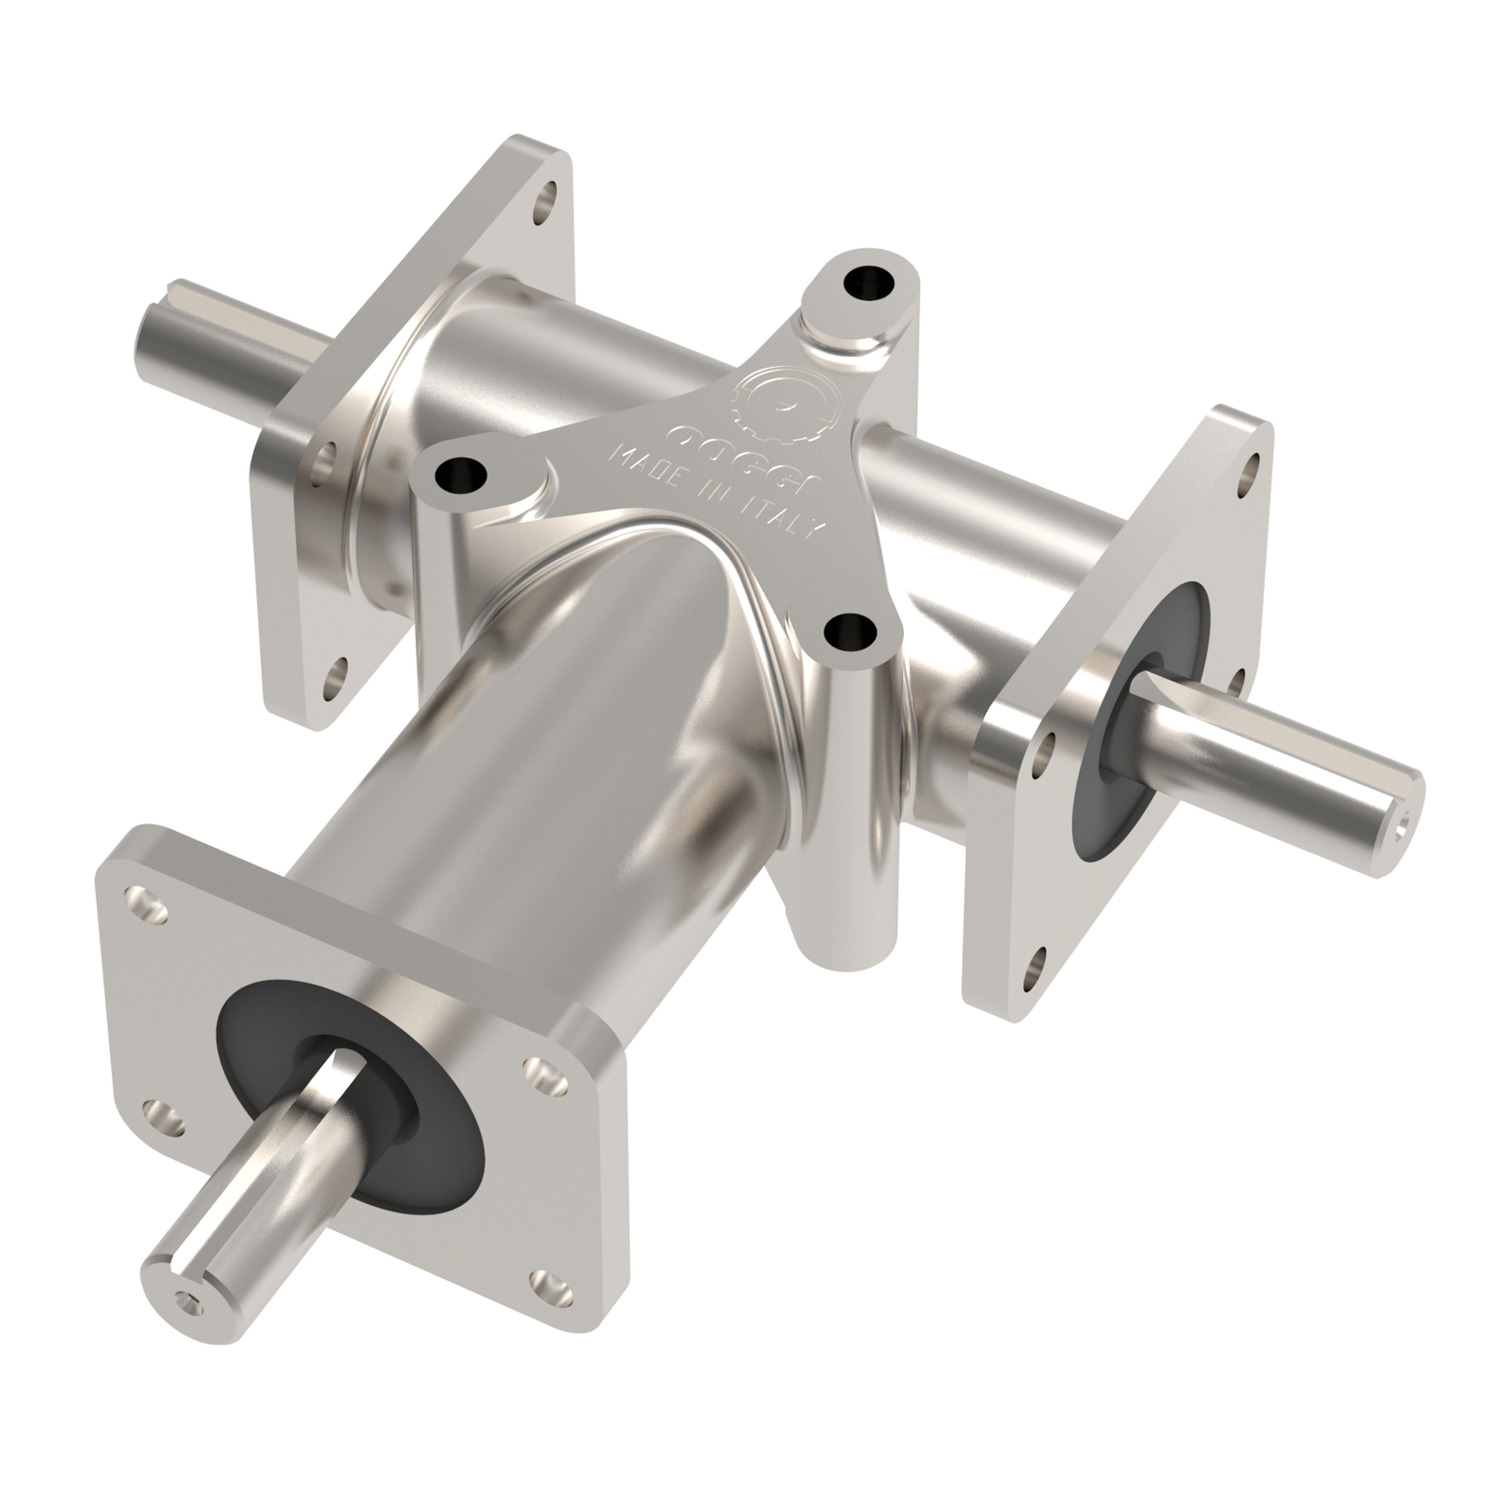 R2355 - Stainless Right Angle Drives - 3 shafts